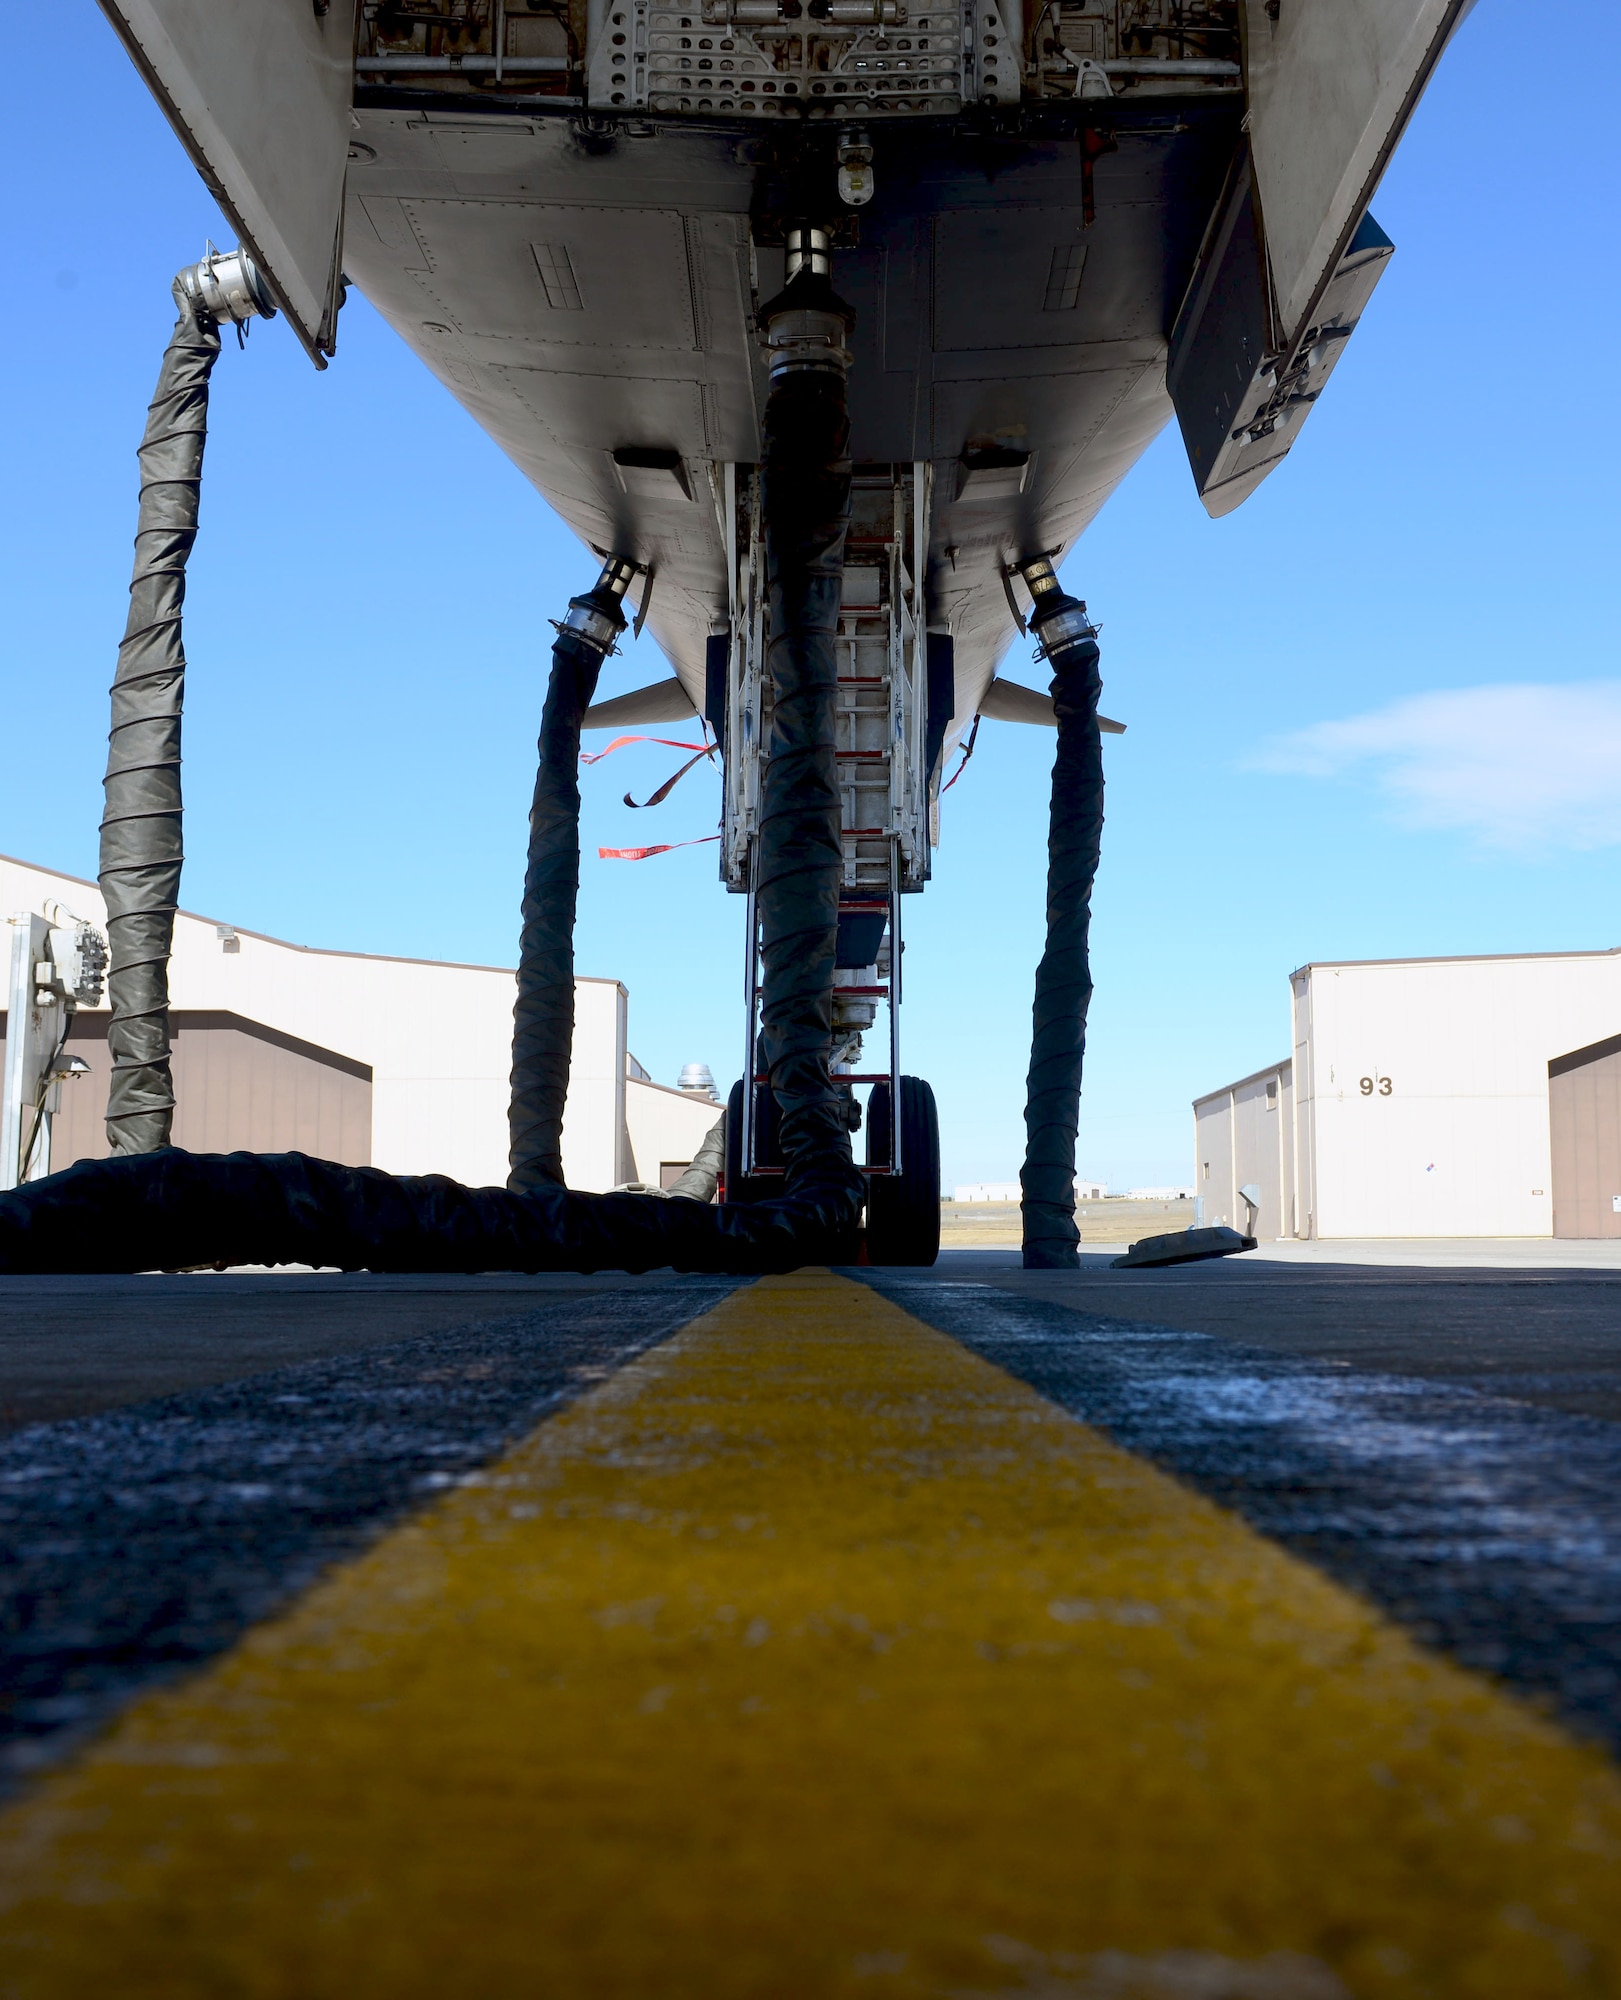 A B-1 bomber is hooked up to the Consolidated Aircraft Support System at Ellsworth Air Force Base, S.D., March 16, 2017.  Compared to the 20,000 pound air conditioner previously used for pre-flight, CASS is virtually quite, allowing maintainers to communicate more effectively during pre-flight inspections. (U.S. Air Force photo by Airman 1st Class Donald C. Knechtel)